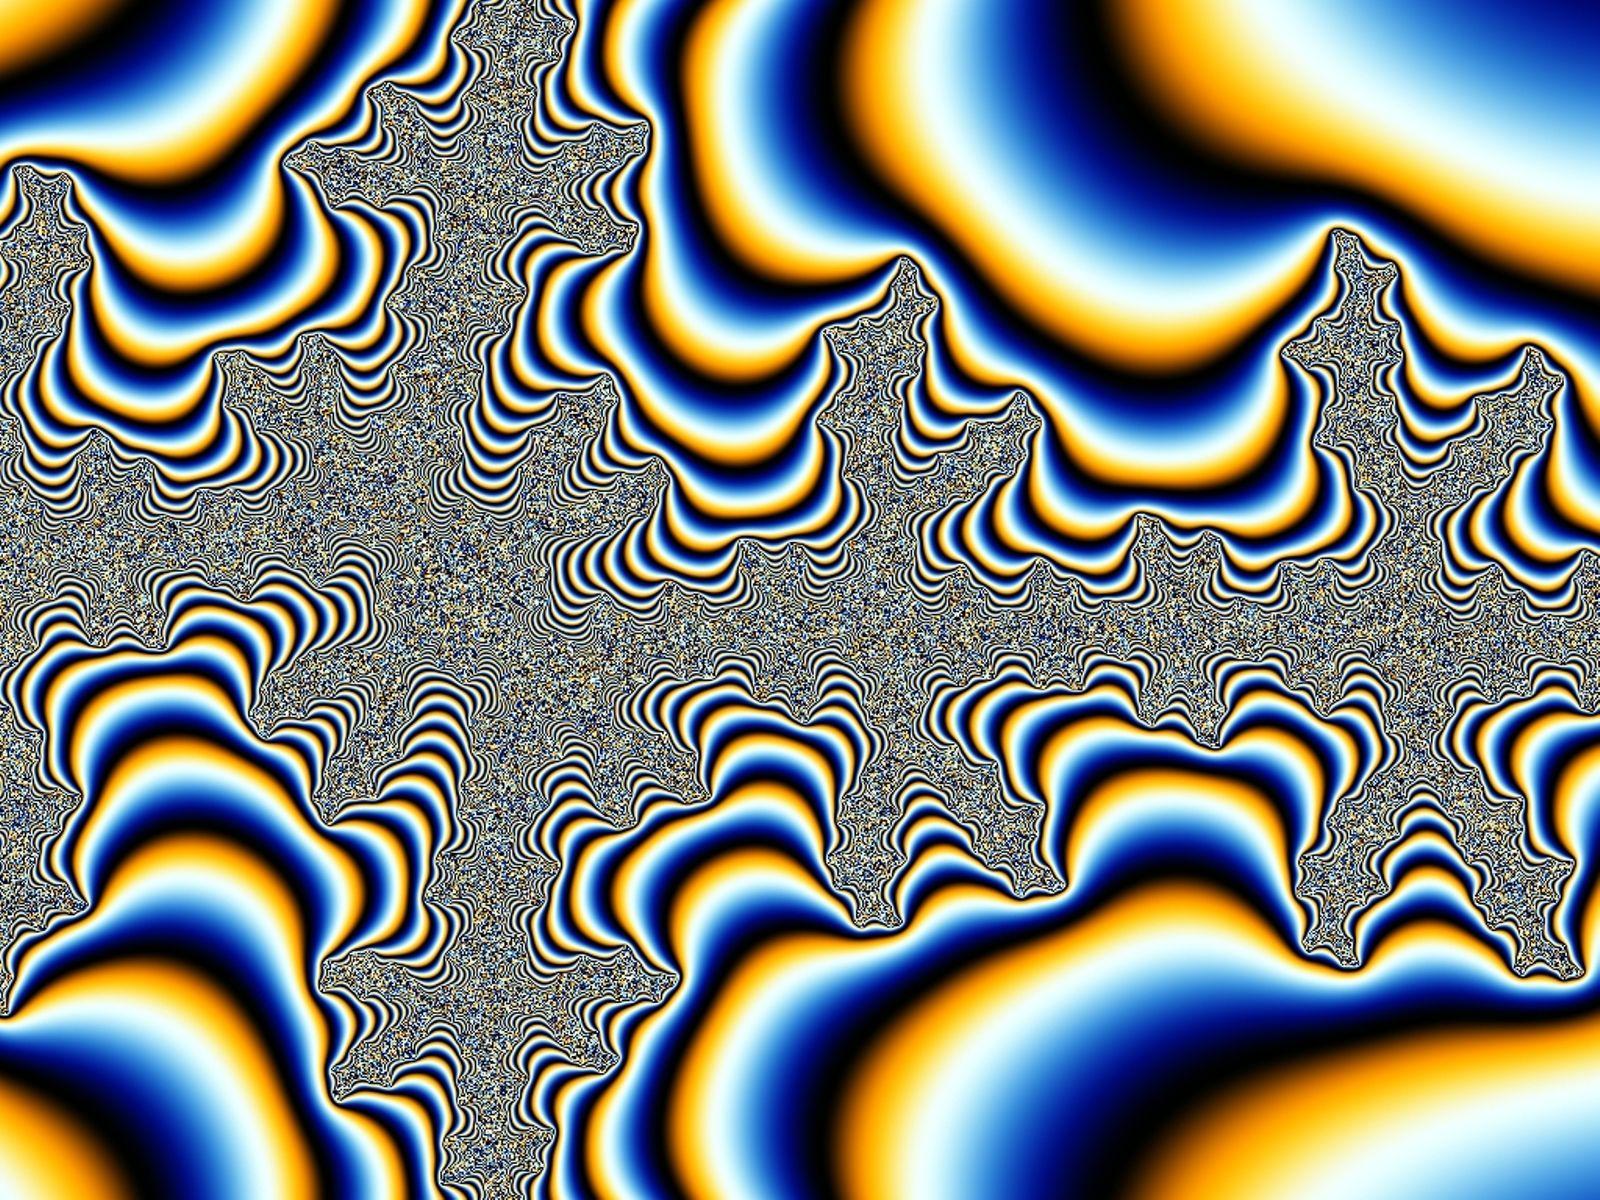 Psychedelic and Trippy background to use as Wallpaper